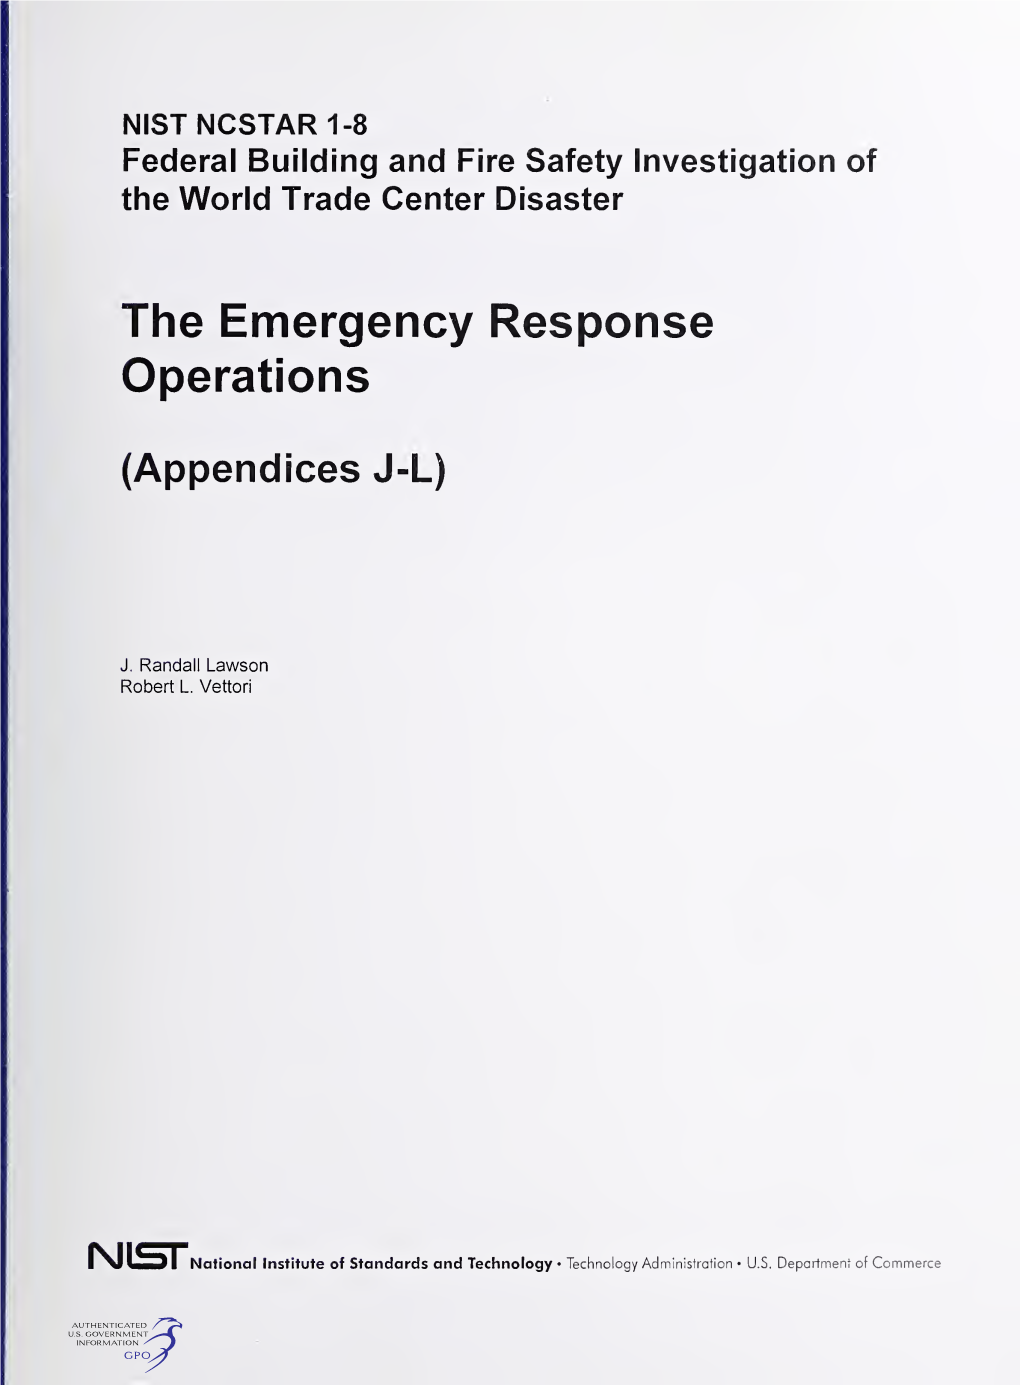 The Emergency Response Operations